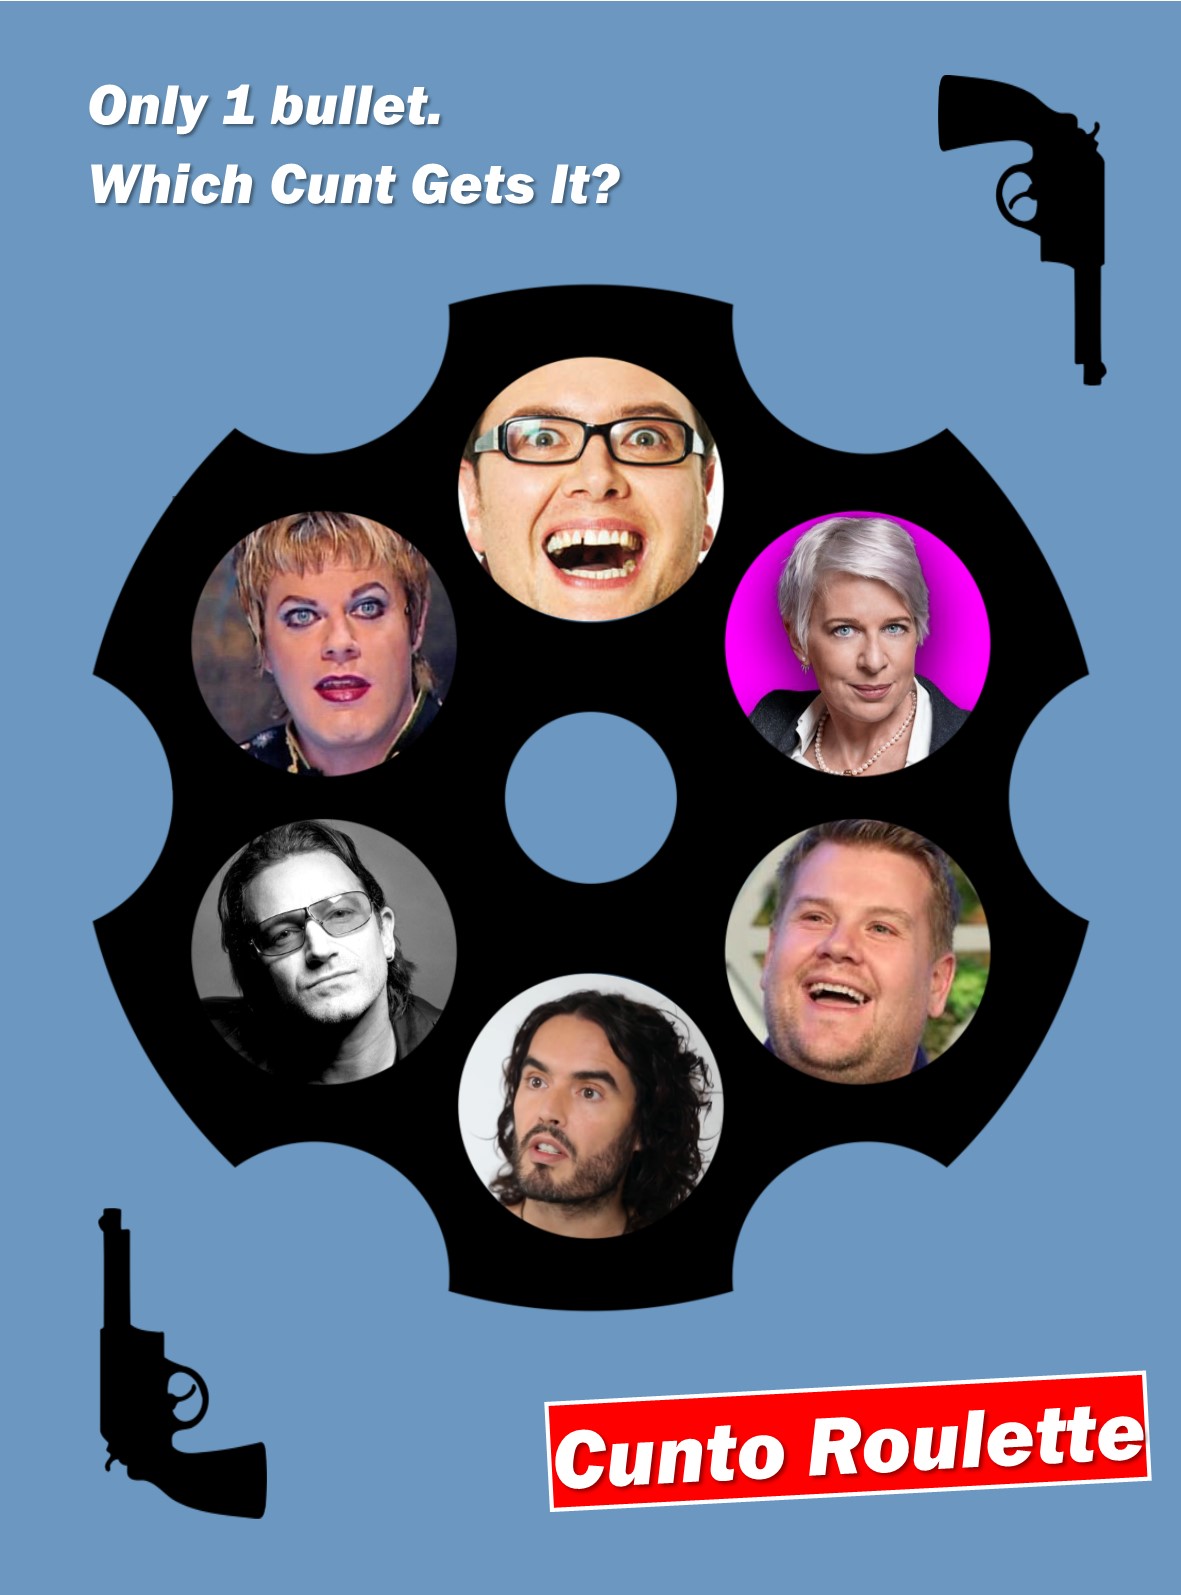 Alan Carr, Eddie Izzard, Katie Hopkins, Bono, James Corden, Russell Brand, all playing Russian Roulette